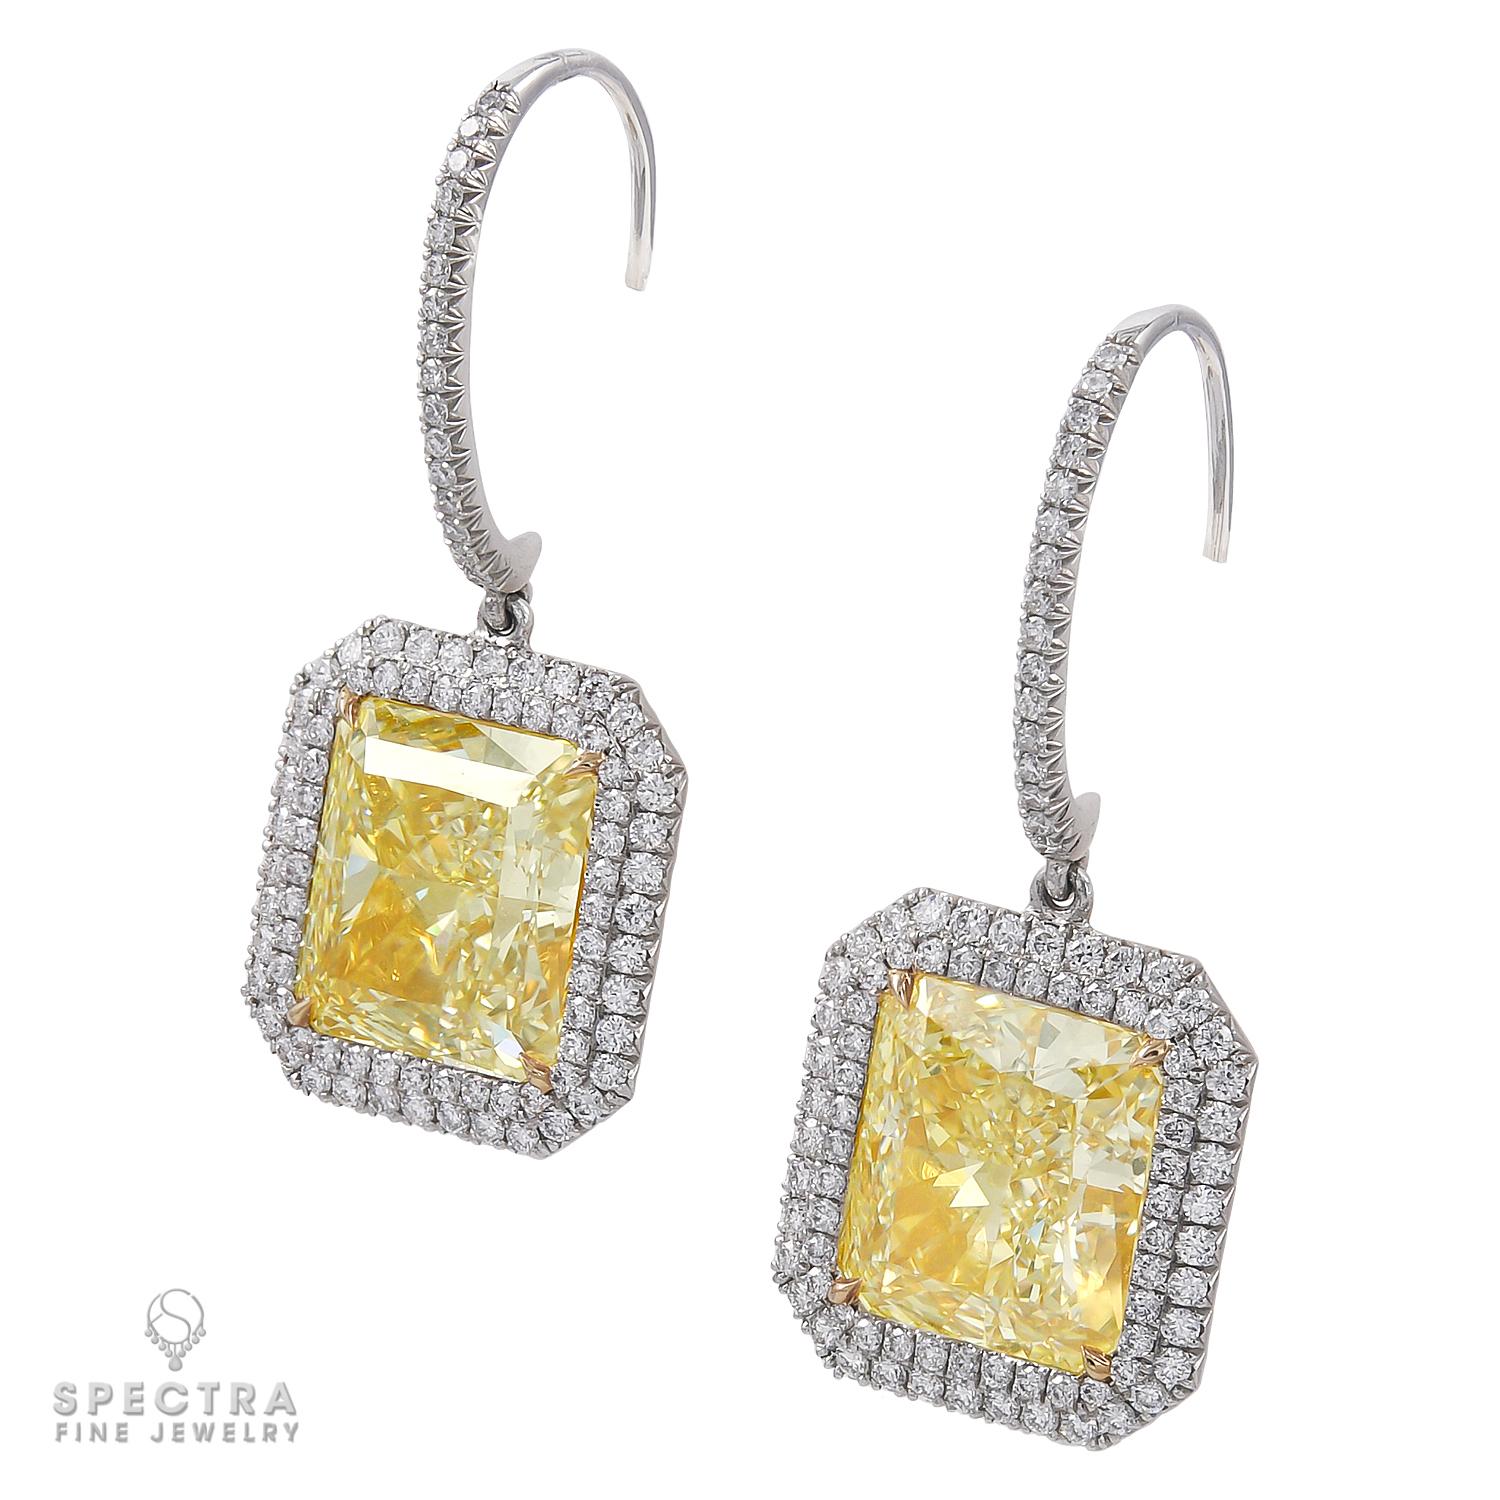 These elegant Diamond Halo Drop Earrings made by Spectra Fine Jewelry in the 21st century, circa 2010, showcase two radiant-cut diamonds set in warm 18k yellow gold each with 4 talon prongs. The diamonds are estimated as 7.01 carats of Y color and